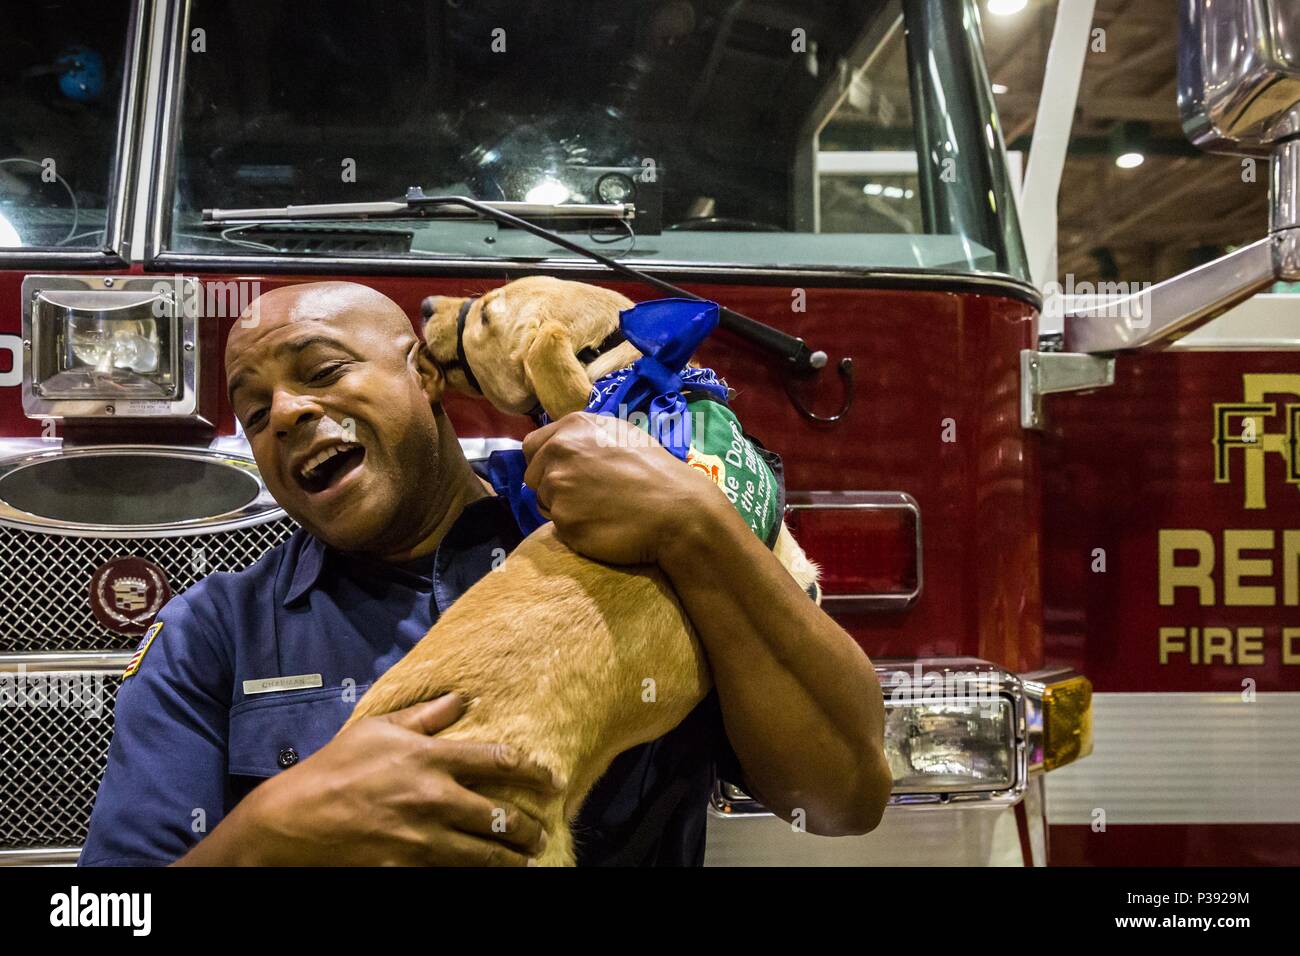 Reno, Nevada, USA. 17th June, 2018. Sunday, June 17, 2018.BERNIE CHAPMAN gets kisses from a Guide Dog For the Blind puppy-in-training during Kid's Day at the Reno Rodeo in Reno, Nevada. Chapman is a firefighter with Reno Fire Department Station 2. The Reno Rodeo is a Professional Rodeo Cowboys Association (PRCA) sanctioned sporting event, and one of the top five rodeos in North America. Reno Rodeo is a non-profit organization made up of over 1,000 volunteers. This year's rodeo, the 99th annual, runs from June 14-23, 2018. Credit: Tracy Barbutes/ZUMA Wire/Alamy Live News Stock Photo